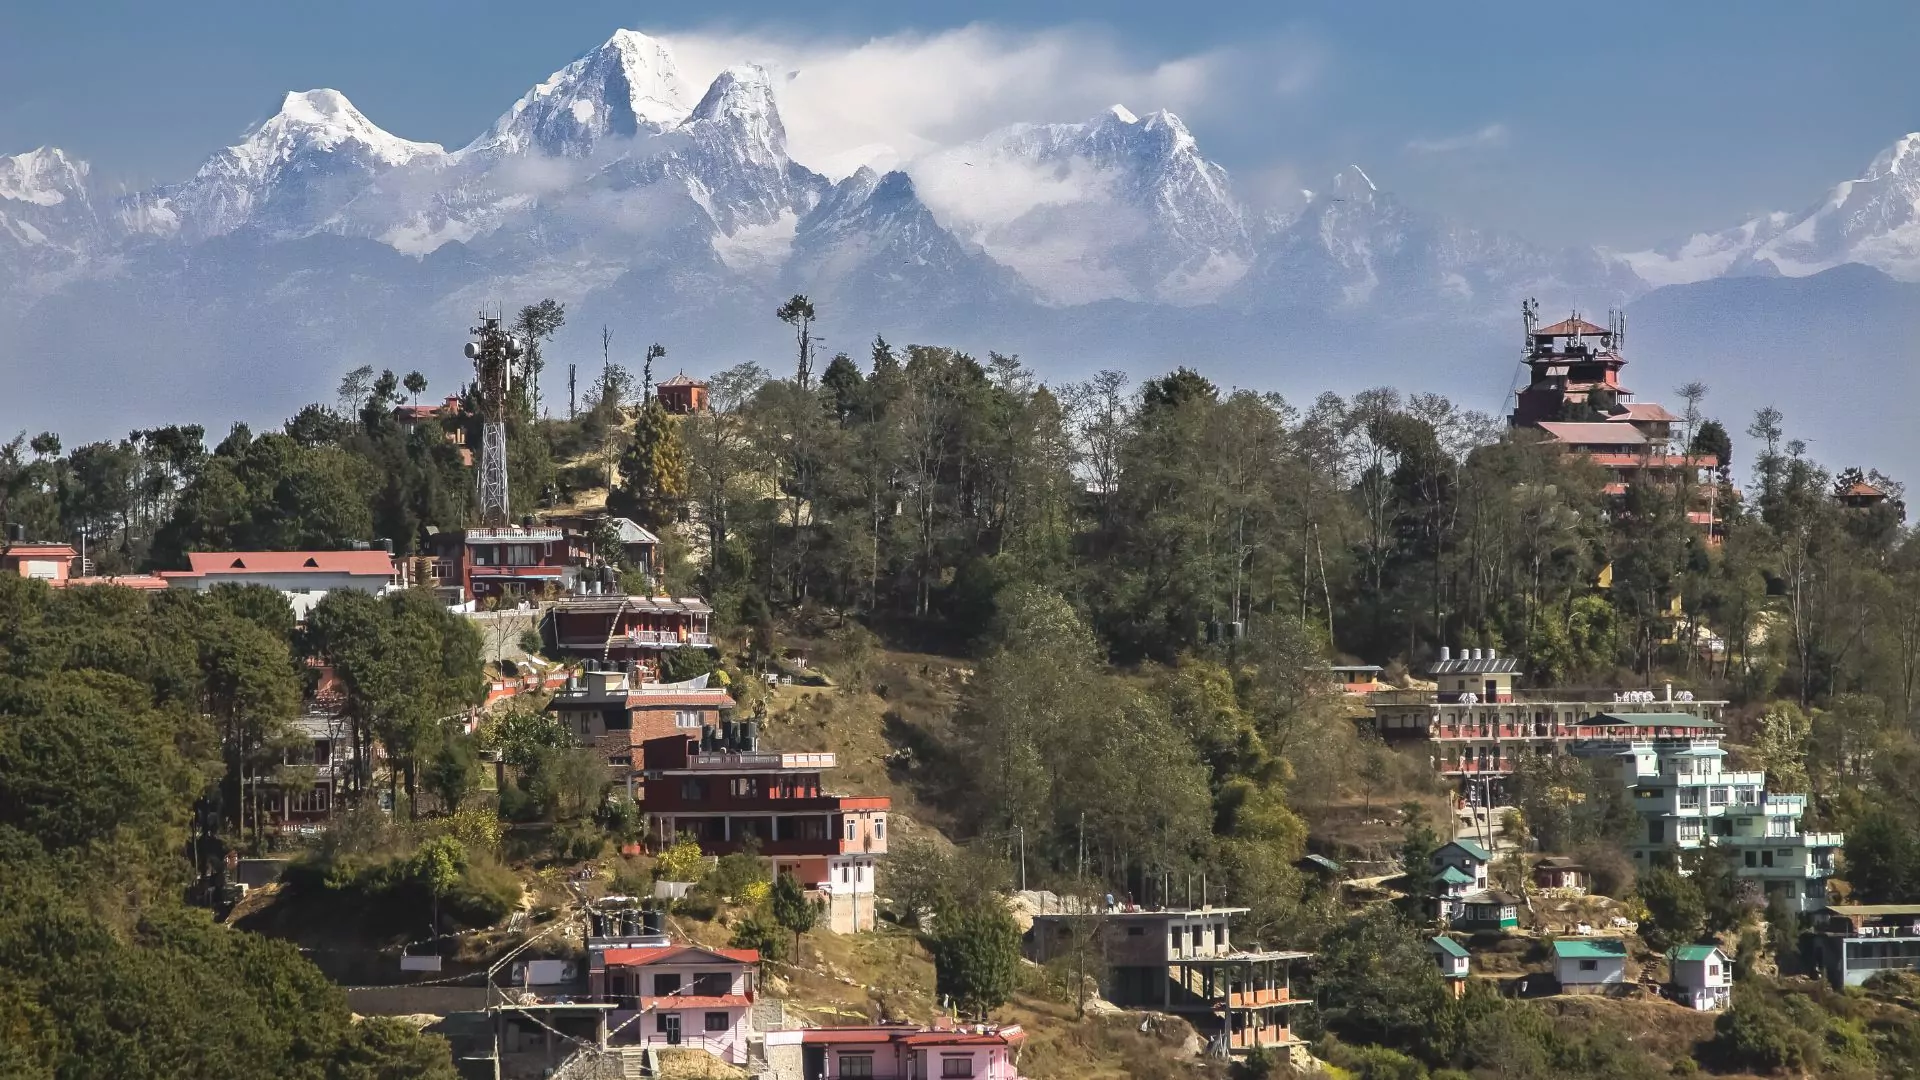 The village of Lantang, Nepal perches in the foreground with windswept peaks behind